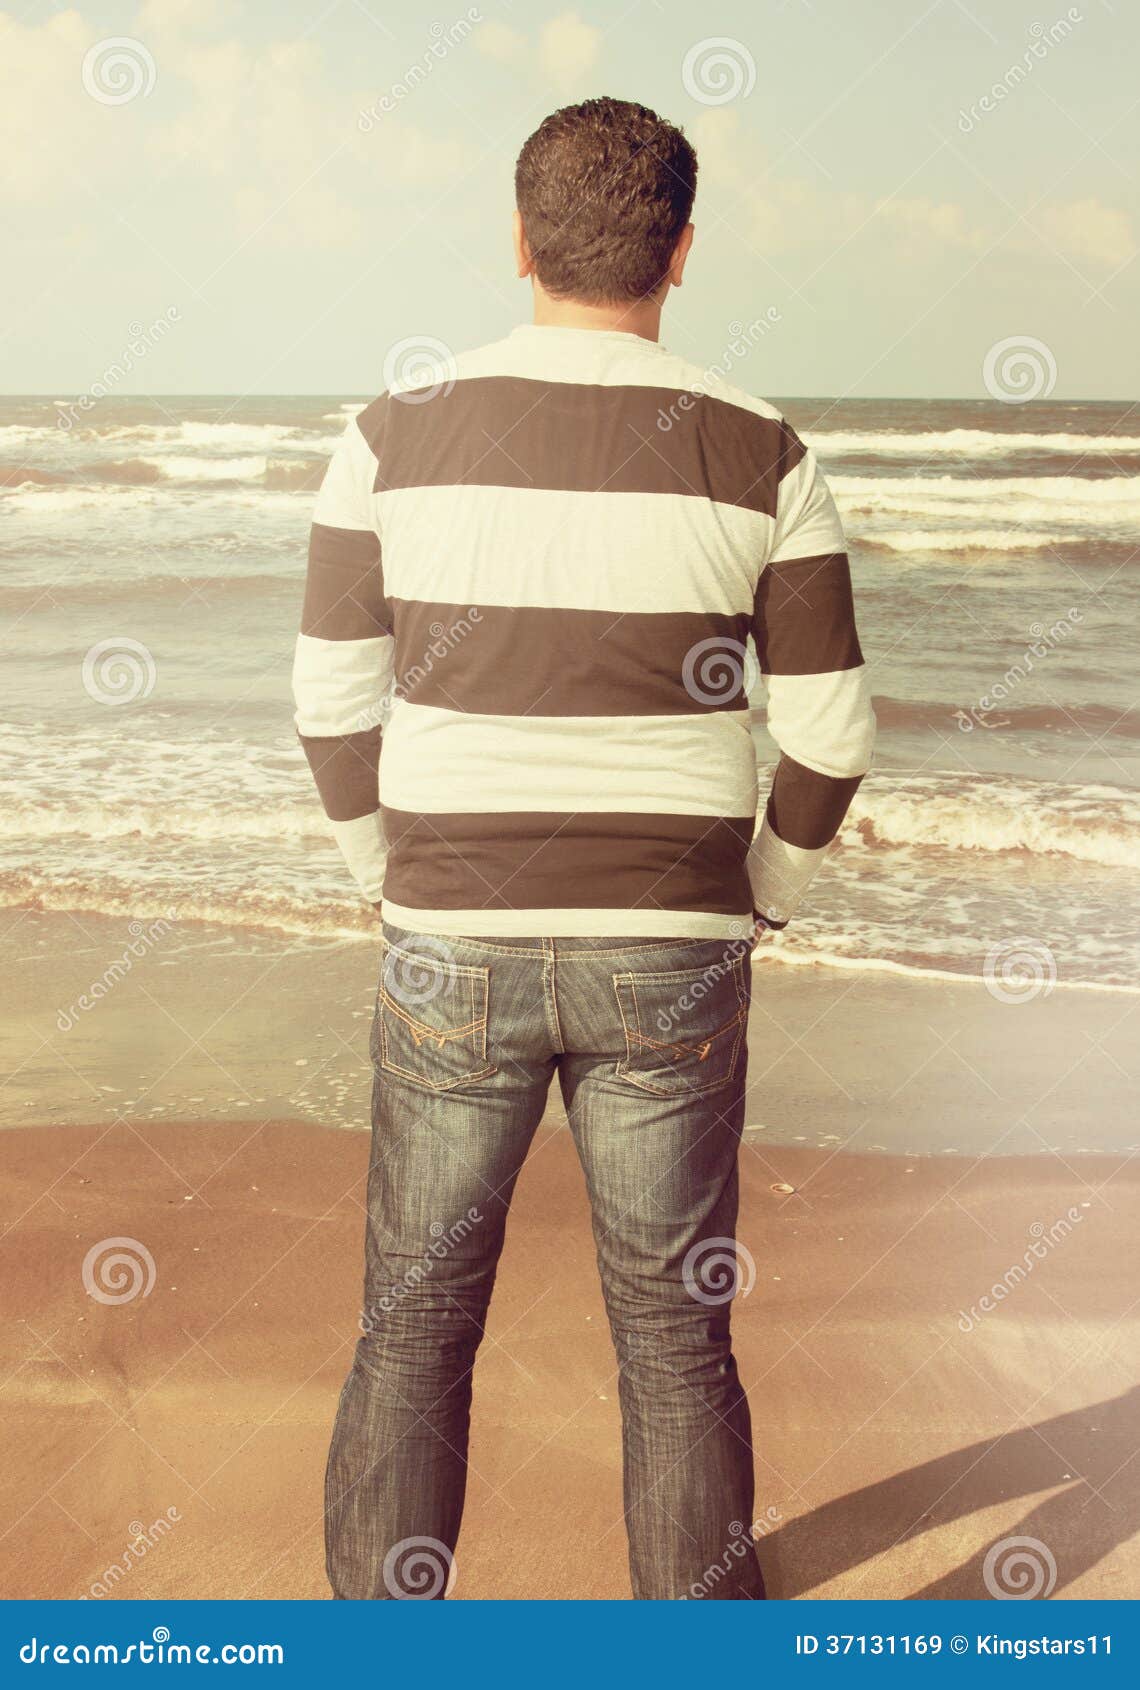 A Man Stands On The Sand Of Beach Stock Image Image Of Coast Horizon